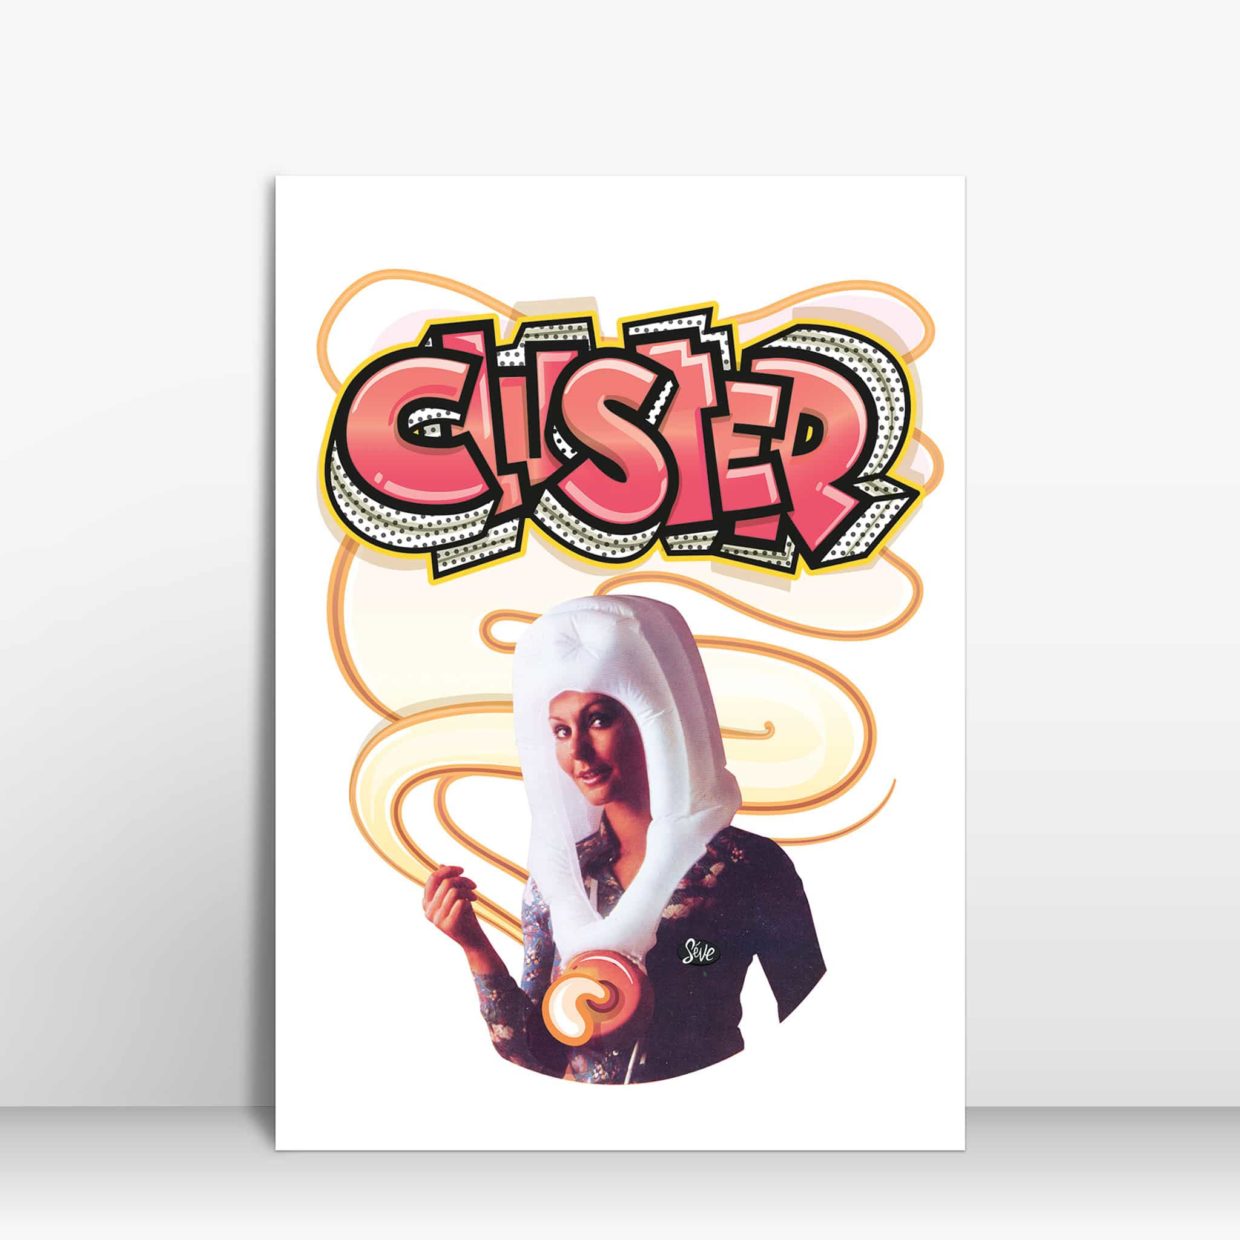 Le poster anti "Cluster"